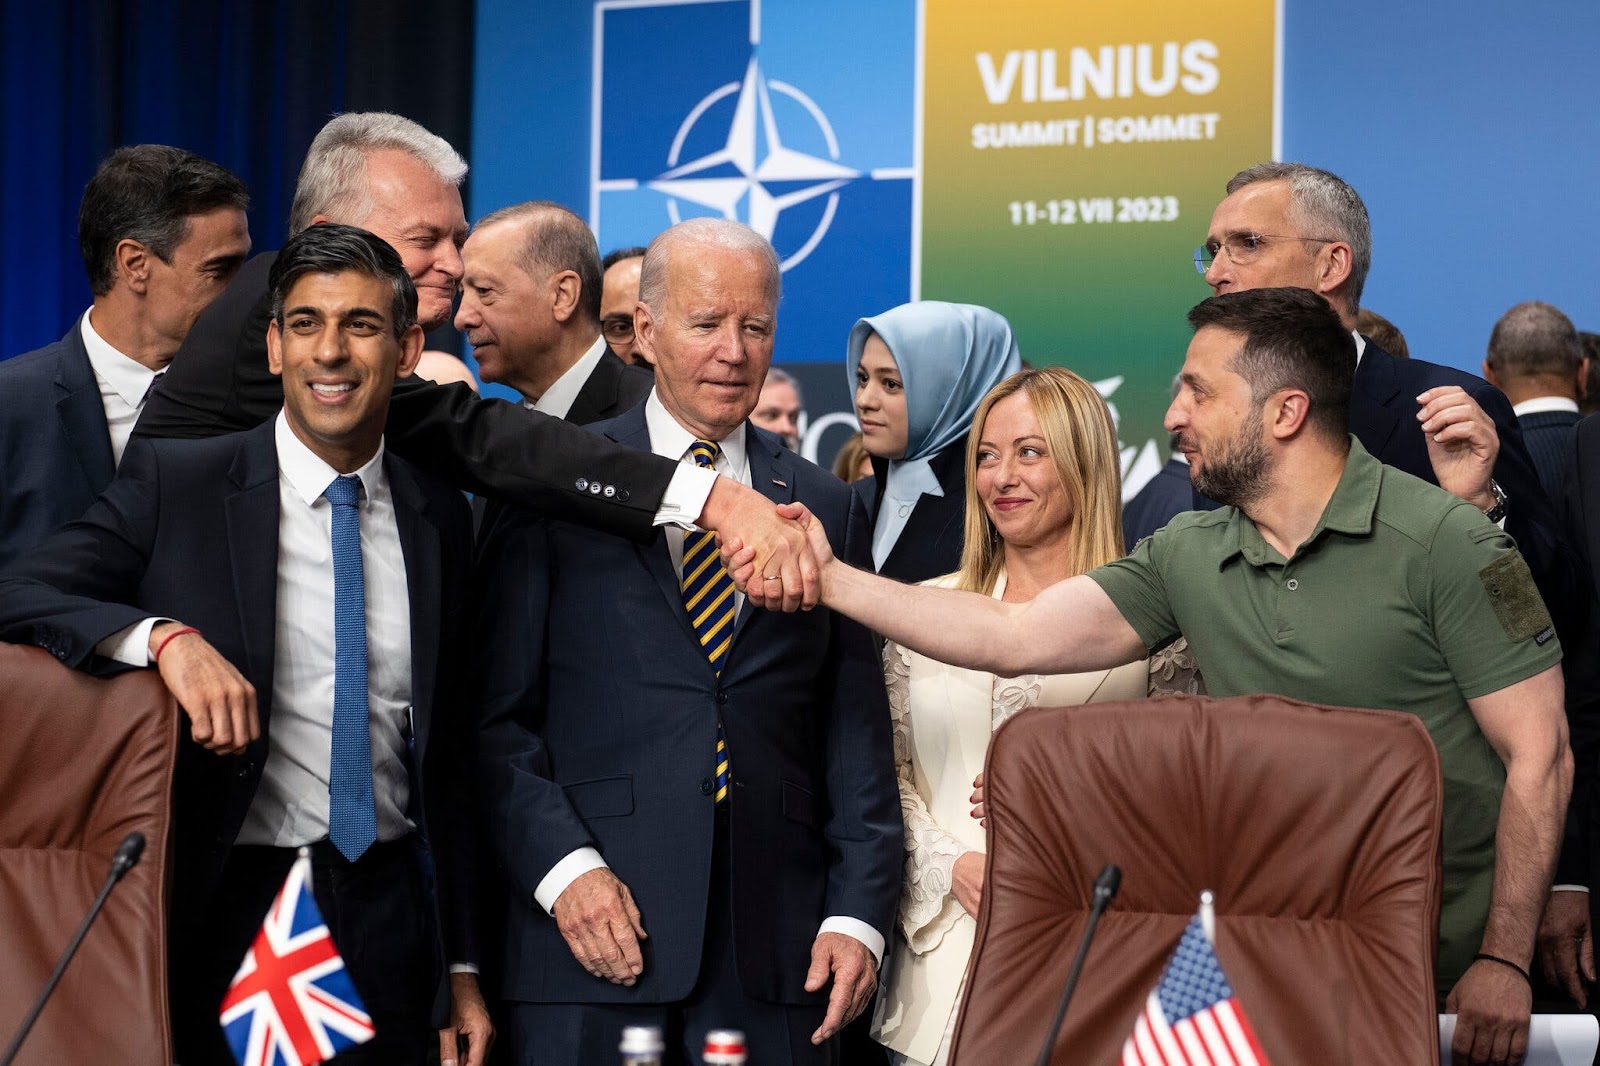 President Volodymyr Zelensky of Ukraine, right, with G7 leaders at the NATO summit in Vilnius, Lithuania, on Wednesday